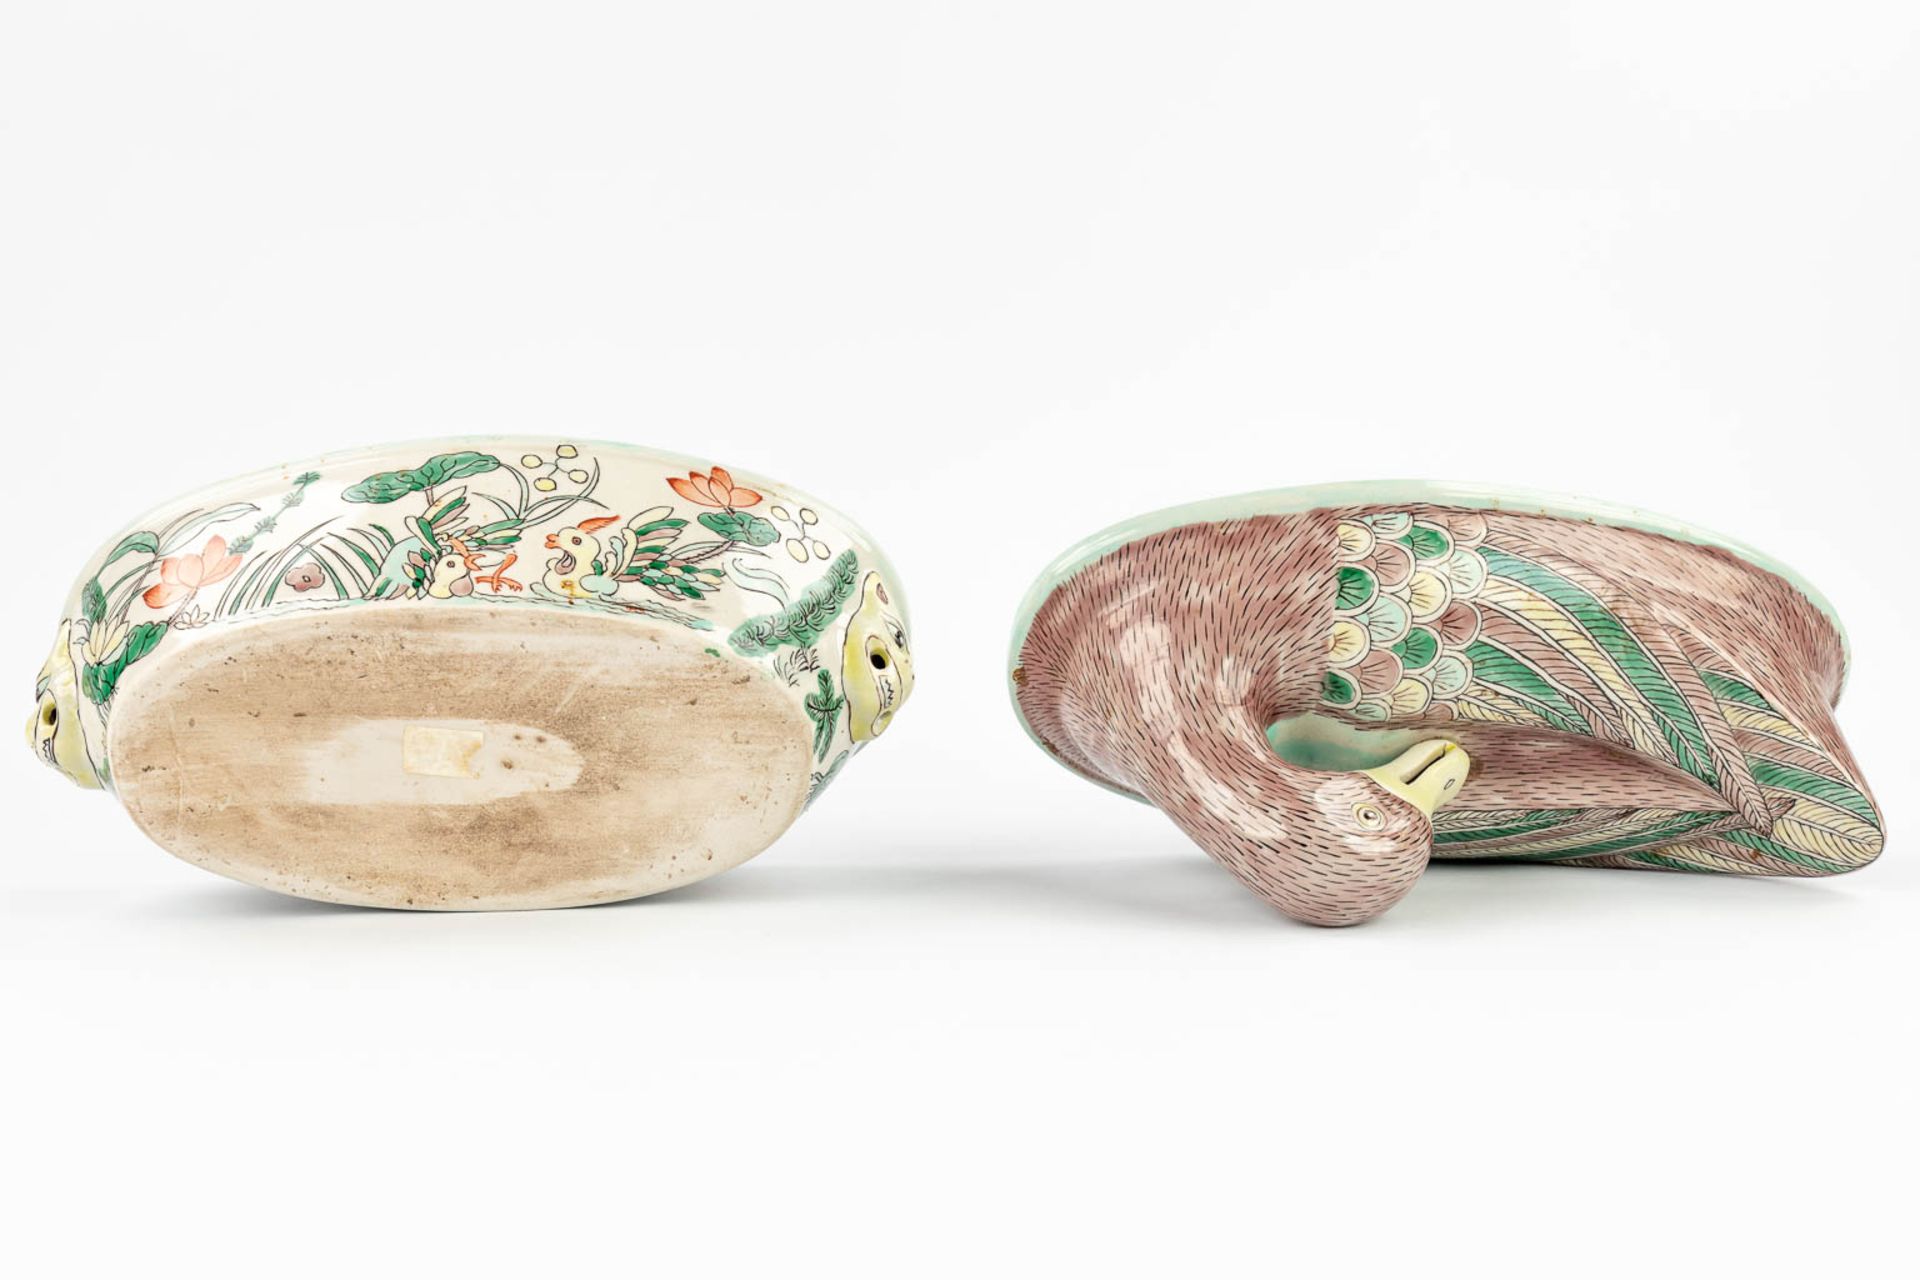 A figurative tureen in the shape of a duck, with hand-painted decor. (17 x 32 x 22cm) - Image 7 of 13